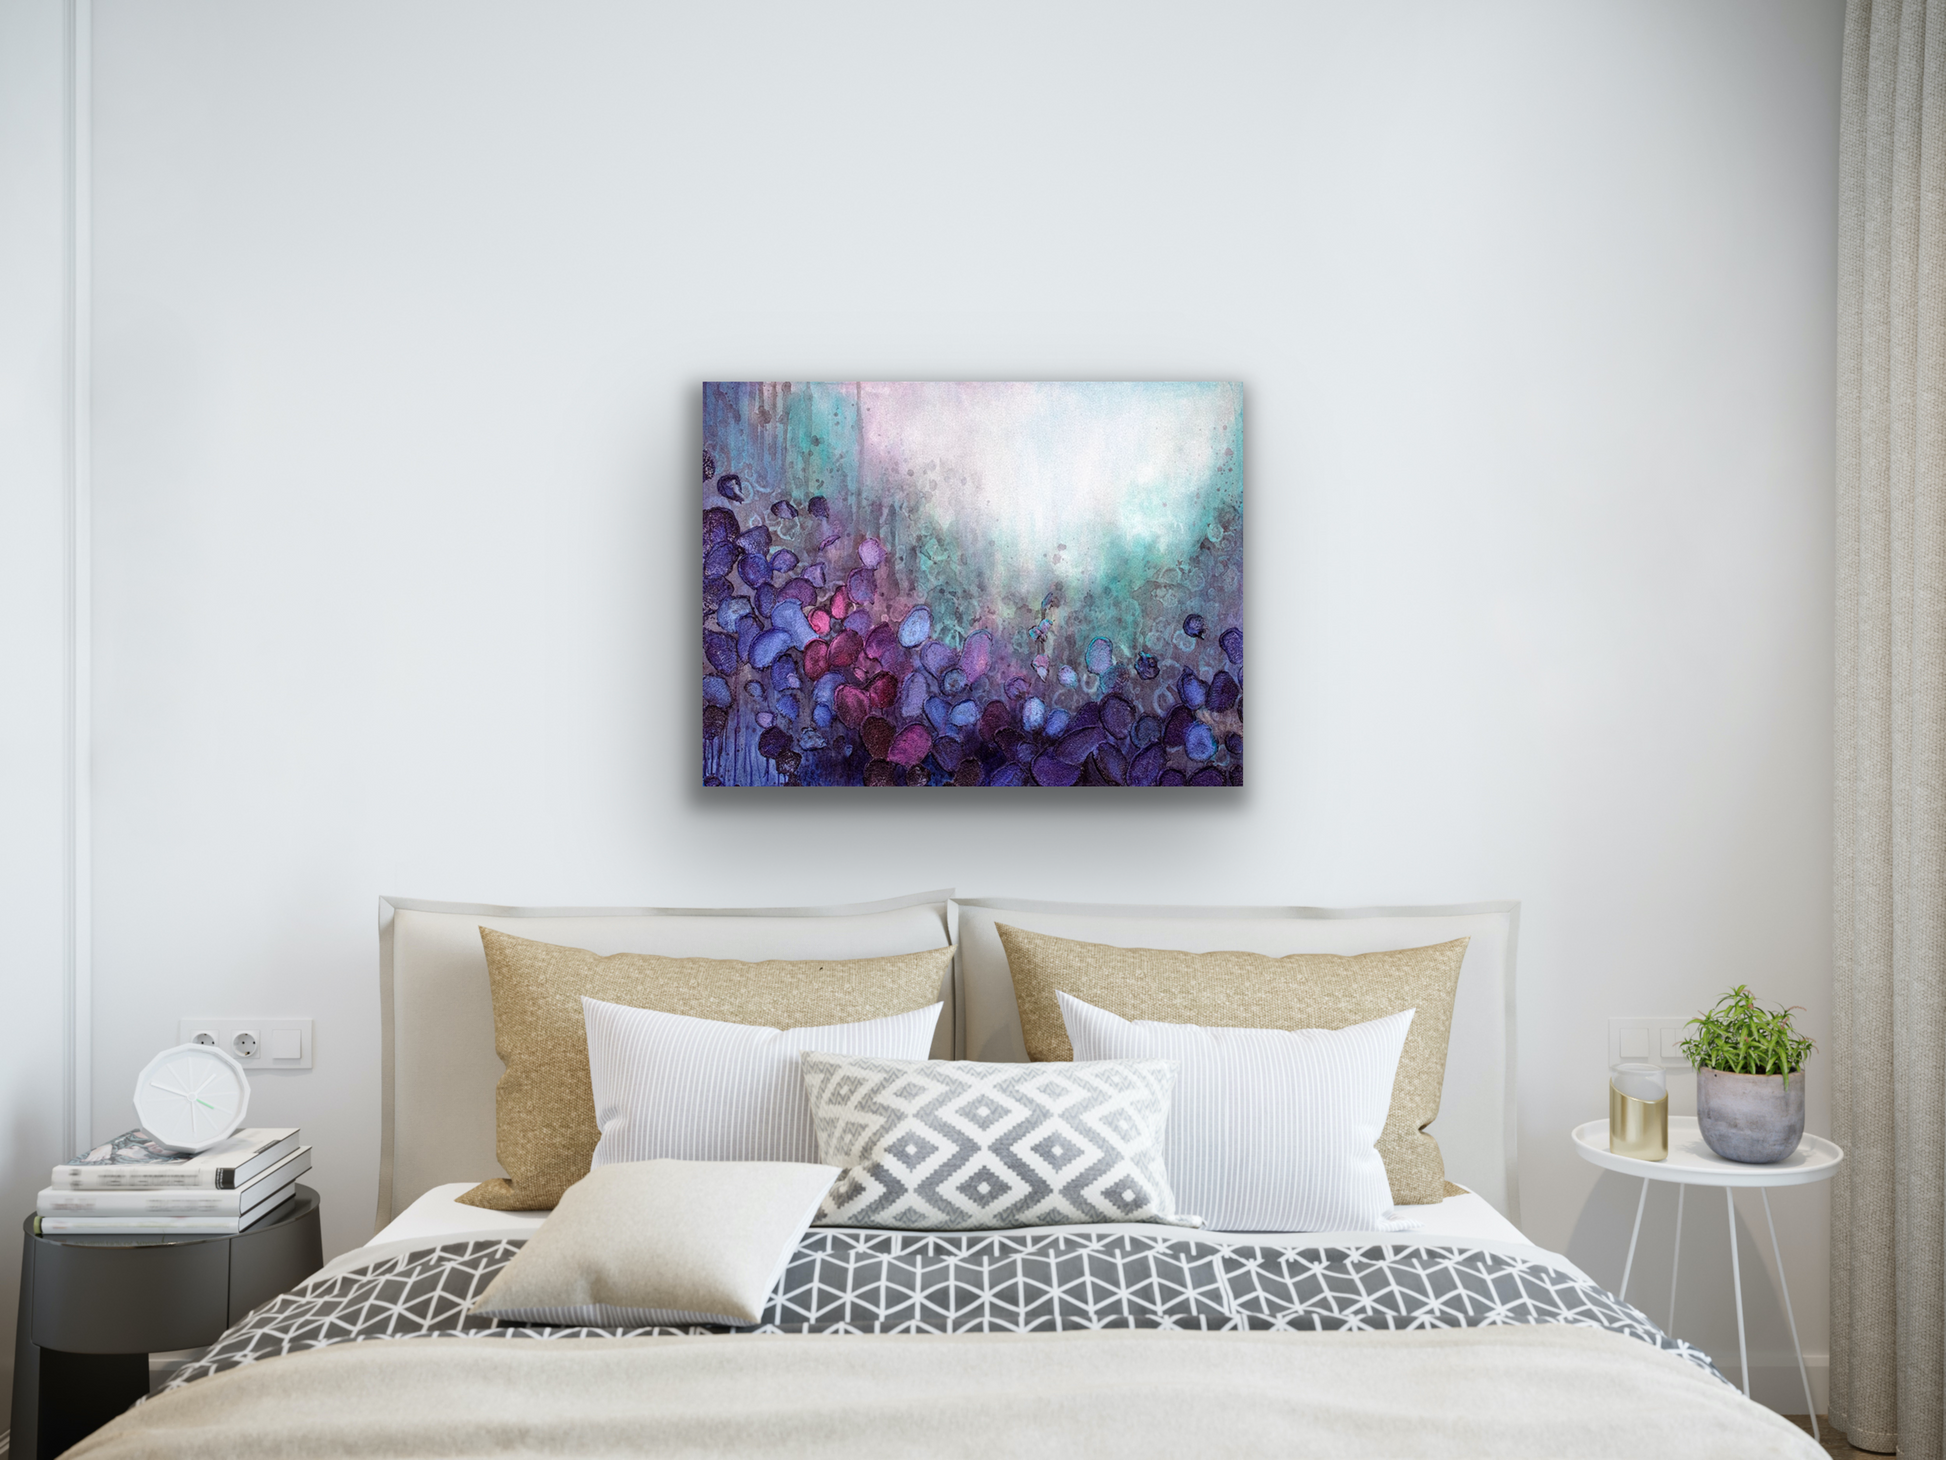 Sea o f Bloom wall art will look great in your bedroom, hallway, dining room and living room.